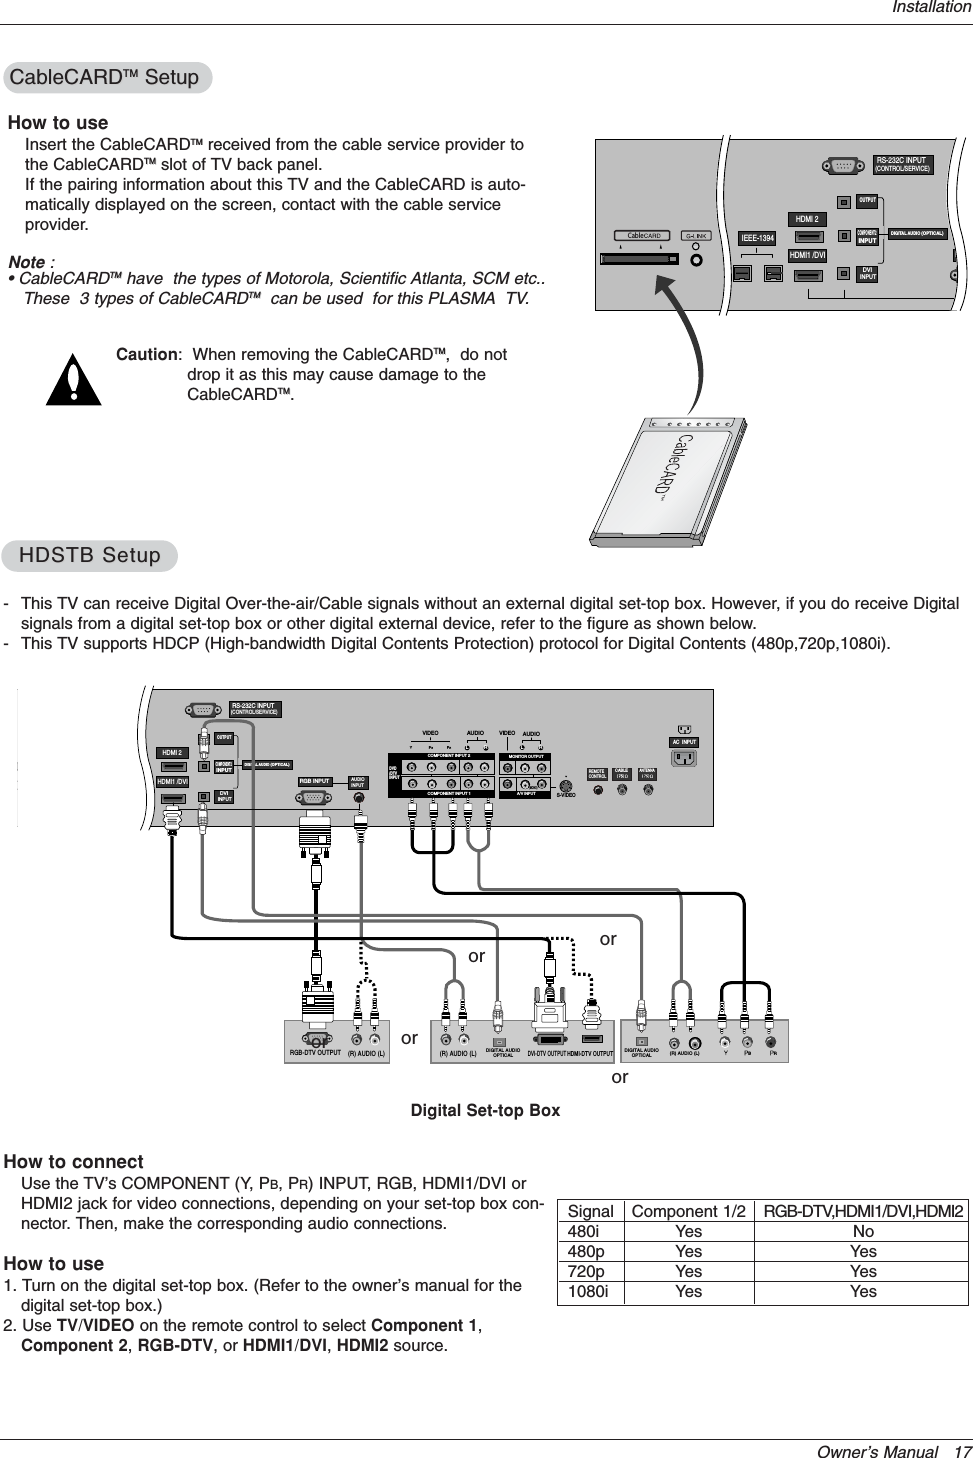 Owner’s Manual   17Installation- This TV can receive Digital Over-the-air/Cable signals without an external digital set-top box. However, if you do receive Digitalsignals from a digital set-top box or other digital external device, refer to the figure as shown below.- This TV supports HDCP (High-bandwidth Digital Contents Protection) protocol for Digital Contents (480p,720p,1080i).How to connectUse the TV’s COMPONENT (Y, PB, PR) INPUT, RGB, HDMI1/DVI orHDMI2 jack for video connections, depending on your set-top box con-nector. Then, make the corresponding audio connections.How to use1. Turn on the digital set-top box. (Refer to the owner’s manual for thedigital set-top box.) 2. Use TV/VIDEO on the remote control to select Component 1,Component 2,RGB-DTV, or HDMI1/DVI,HDMI2 source.HDSTB SetupHDSTB SetupRS-232C INPUT(CONTROL/SERVICE)AUDIORLDIGITAL AUDIO (OPTICAL)DVIINPUTCOMPONENT2INPUTOUTPUTRGB INPUTVIDEOHDMI 2HDMI1 /DVICOMPONENT INPUT 1RL(MONO)CABLEANTENNA AC  INPUTDVD/DTVINPUTIEEE-1394COMPONENT INPUT 2MONITOR OUTPUTA/V INPUT VIDEOAUDIOCable(R) AUDIO (L)RGB-DTV OUTPUTBR(R) AUDIO (L)DIGITAL AUDIOOPTICAL(R) AUDIO (L)DVI-DTV OUTPUTDIGITAL AUDIOOPTICALHDMI-DTV OUTPUTAUDIOINPUTS-VIDEOREMOTECONTROLDigital Set-top BoxororororSignal480i480p720p1080iComponent 1/2YesYesYesYesRGB-DTV,HDMI1/DVI,HDMI2NoYesYesYesCableCARDCableCARDTMTM SetupSetupRS-232C INPUT(CONTROL/SERVICE)DIGITAL AUDIO (OPTICAL)DVIINPUTCOMPONENT2INPUTOUTPUTRGB INHDMI 2HDMI1 /DVIIEEE-1394CableHow to useInsert the CableCARDTMTM received from the cable service provider tothe CableCARDTMTM slot of TV back panel. If the pairing information about this TV and the CableCARD is auto-matically displayed on the screen, contact with the cable serviceprovider.Note :• CableCARDTMTM have  the types of Motorola, Scientific Atlanta, SCM etc..These  3 types of CableCARDTMTM can be used  for this PLASMA TV.Caution:  When removing the CableCARDTMTM,  do notdrop it as this may cause damage to theCableCARDTMTM.or